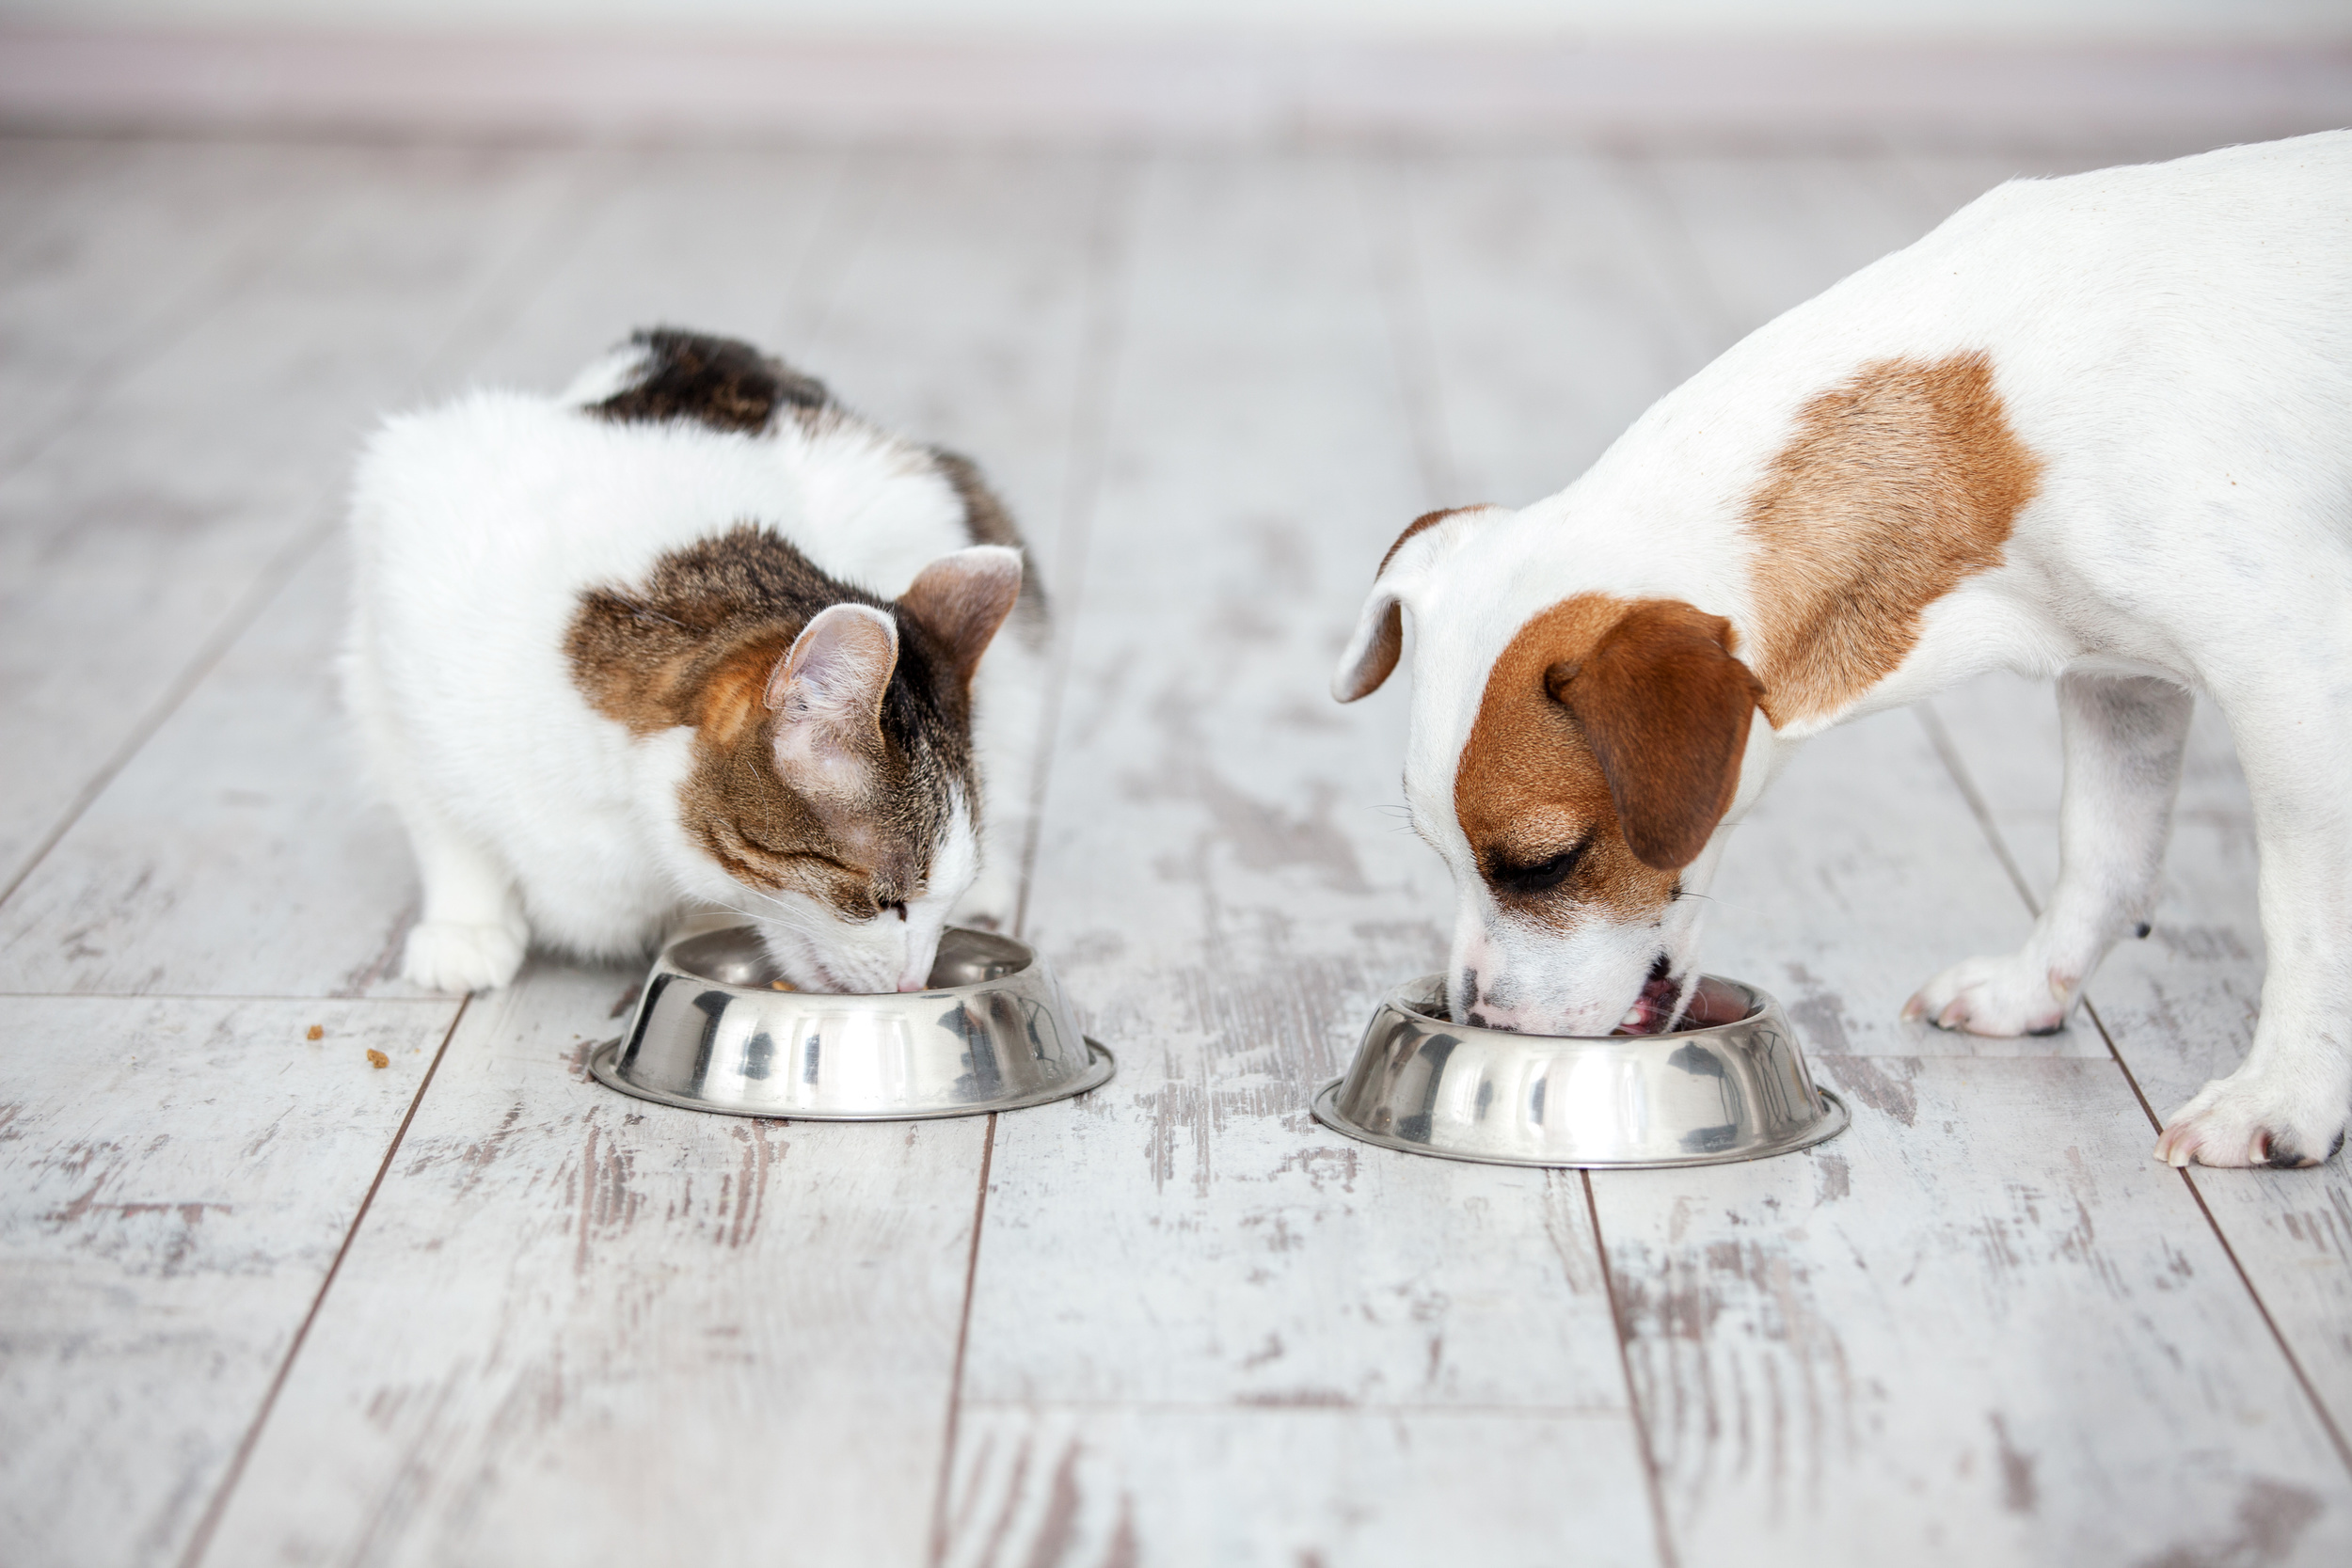 <p>It may seem a little pricey, but spending more on good-quality dog food can actually save cash in the long run by preventing health problems in your pet. Ask your veterinarian for recommendations. </p><p><a href='https://www.msn.com/en-us/community/channel/vid-cj9pqbr0vn9in2b6ddcd8sfgpfq6x6utp44fssrv6mc2gtybw0us'>Follow us on MSN to see more of our exclusive lifestyle content.</a></p>